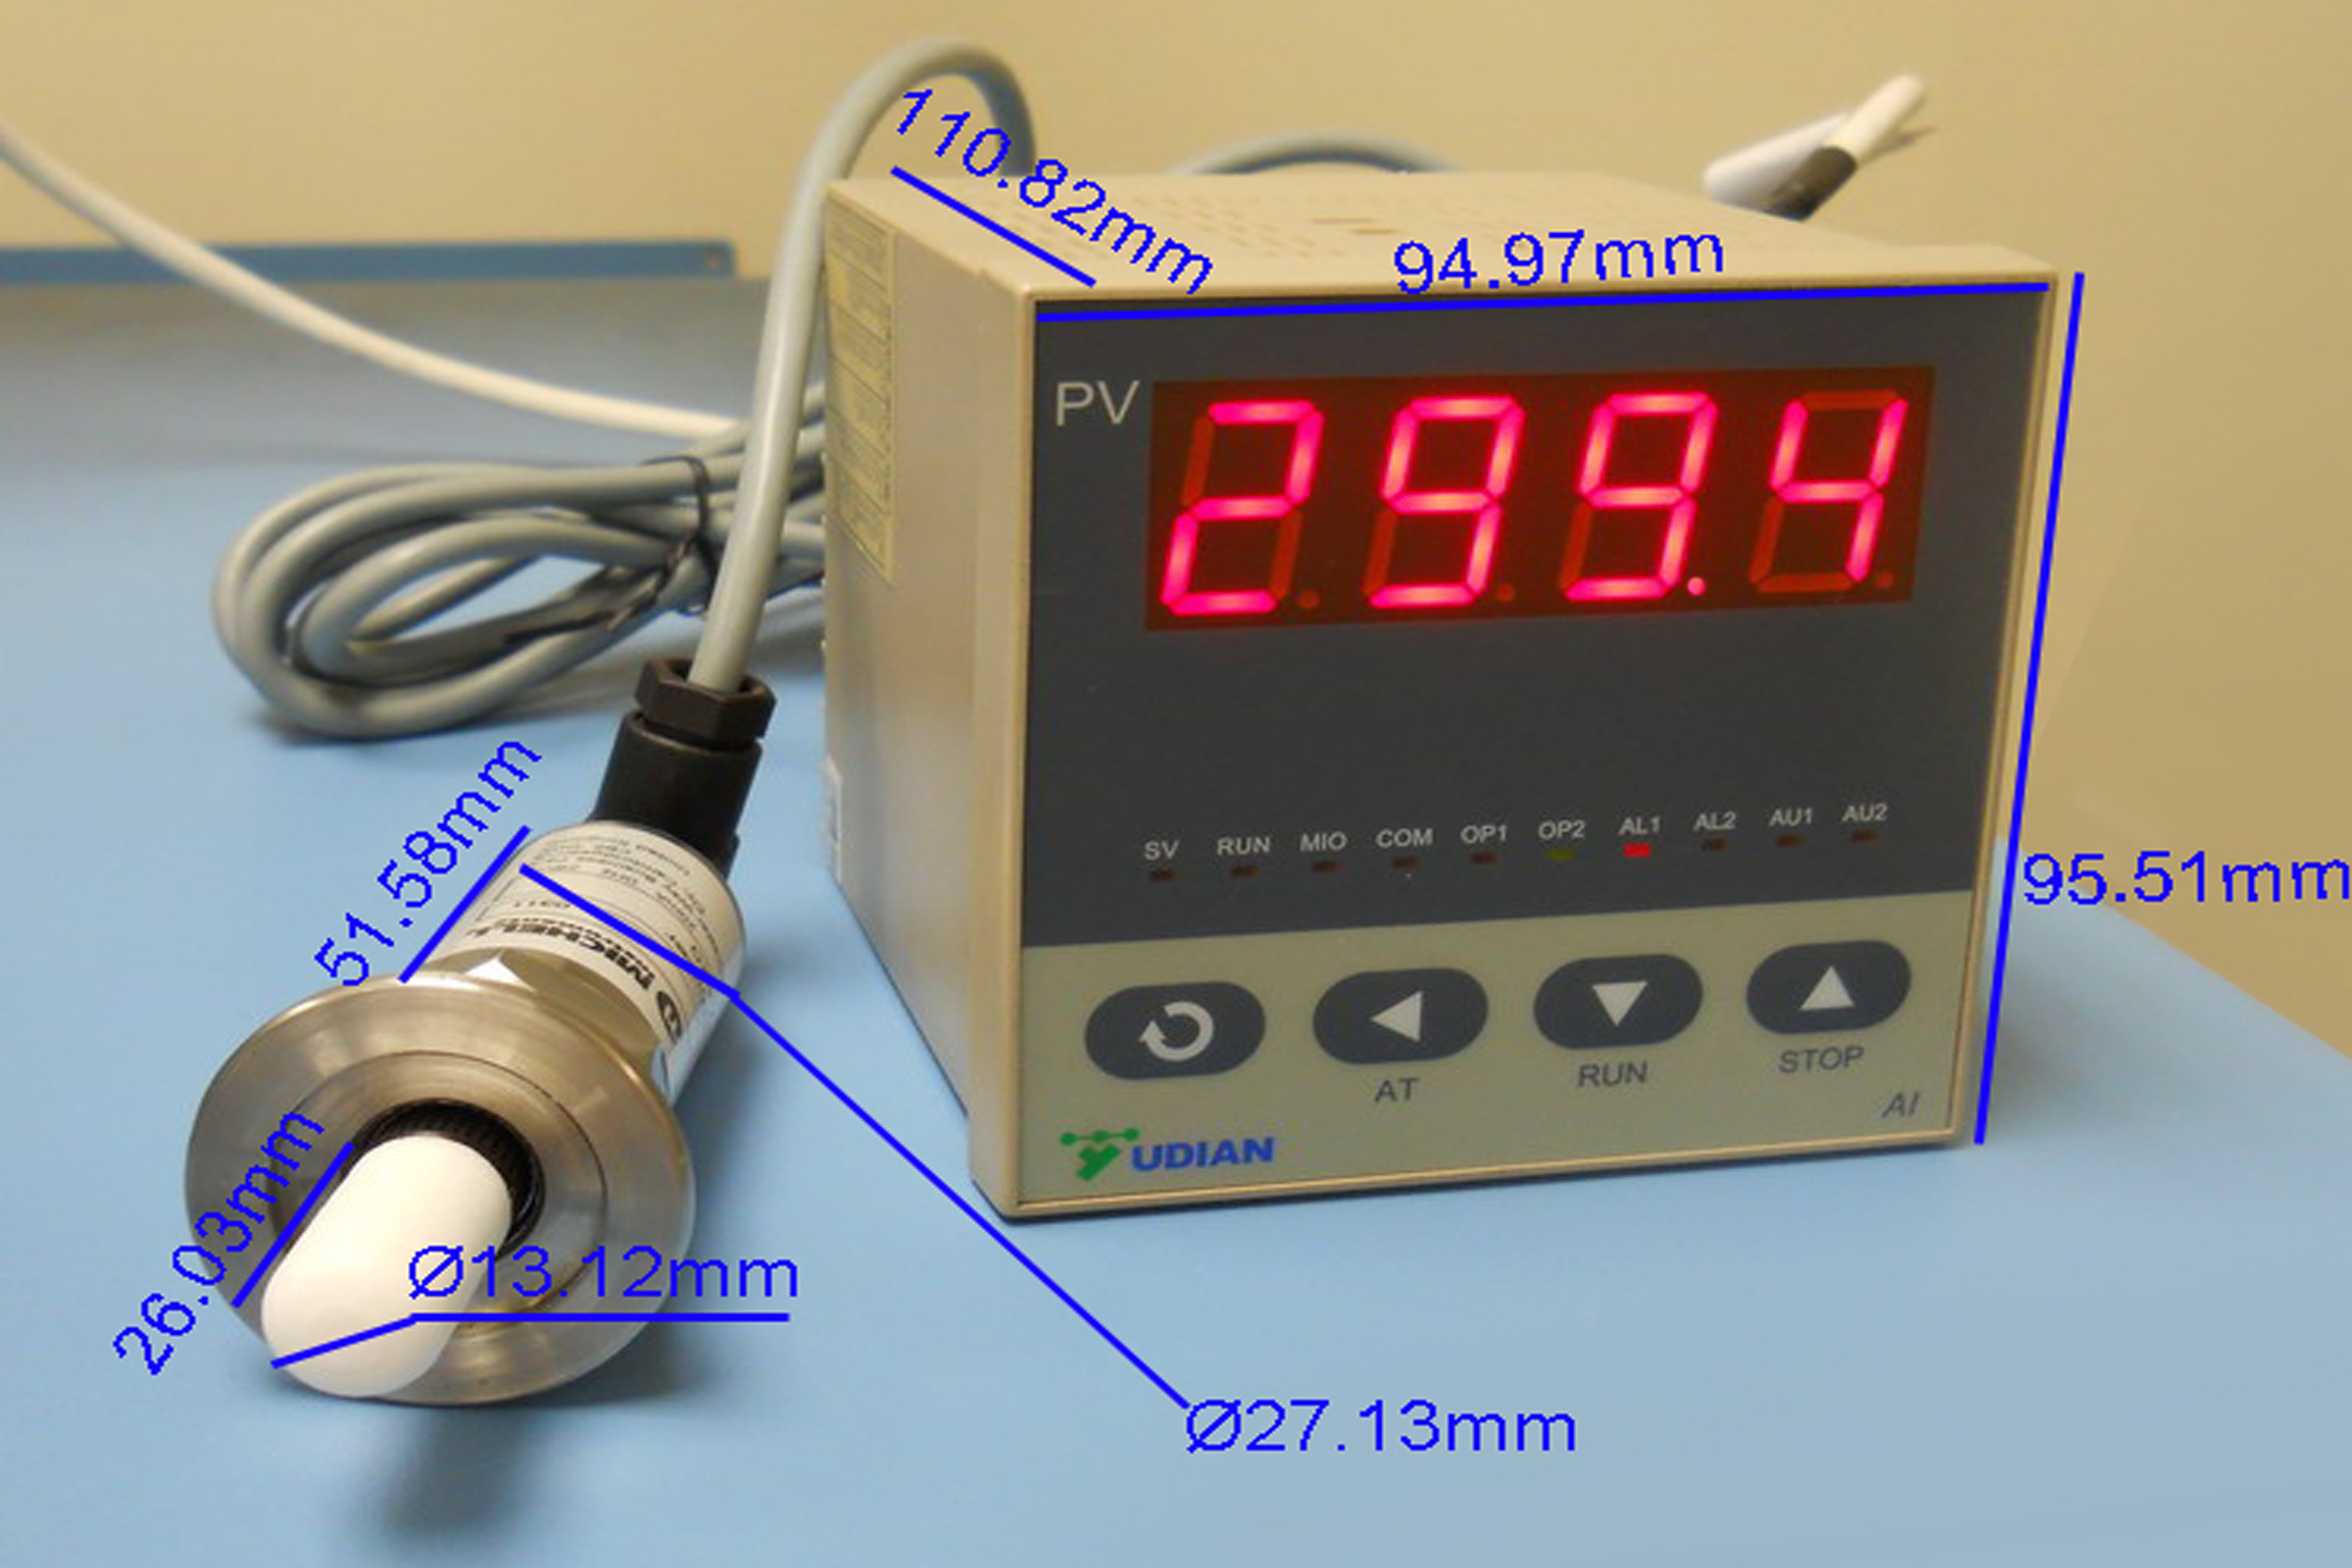 Temperature & Humidity Gauge - MTH - Grower's Solution